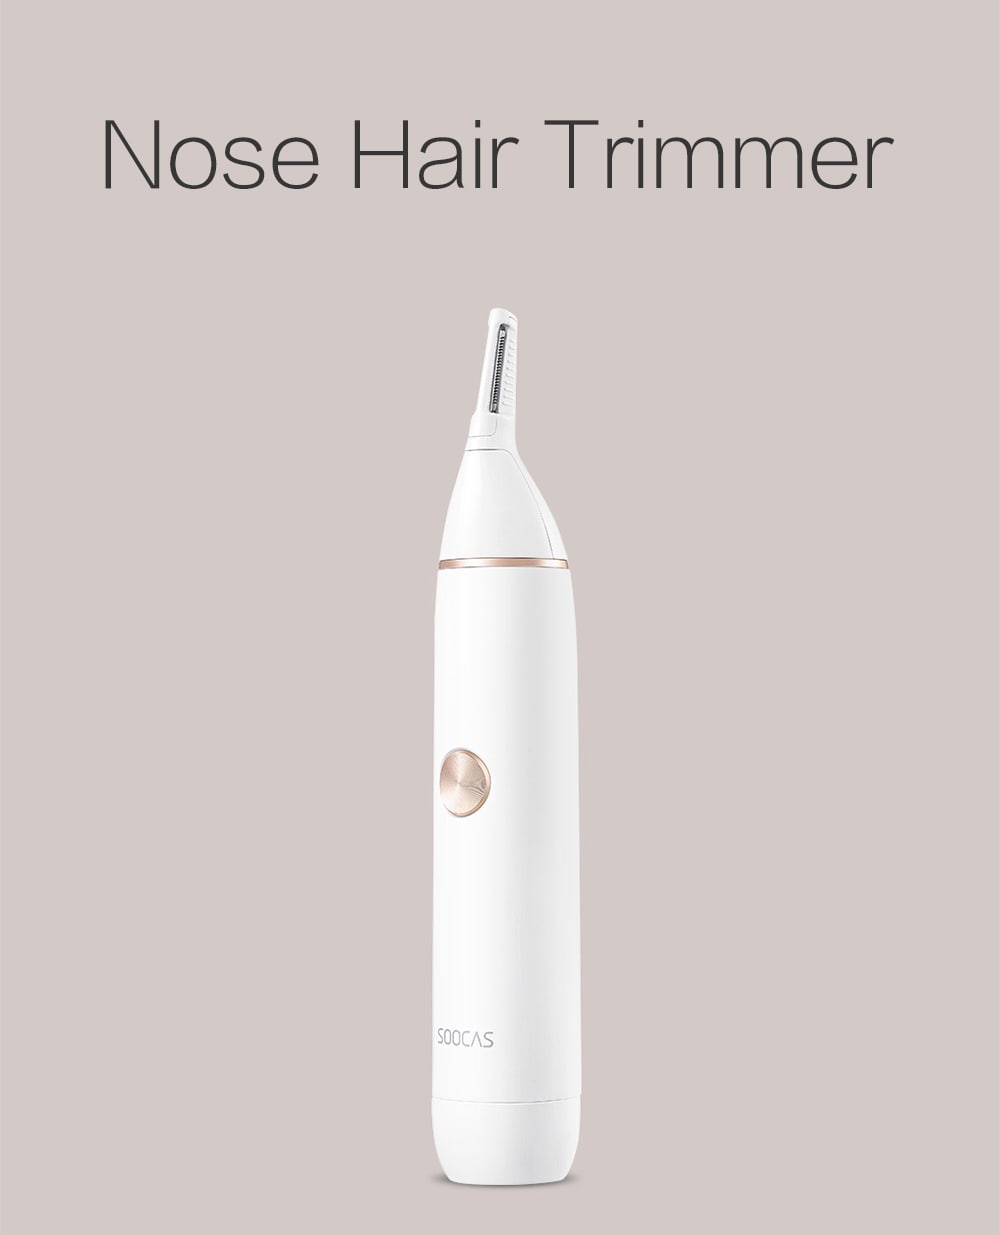 SOOCAS N1 Nose Hair Trimmer from Xiaomi Youpin- White